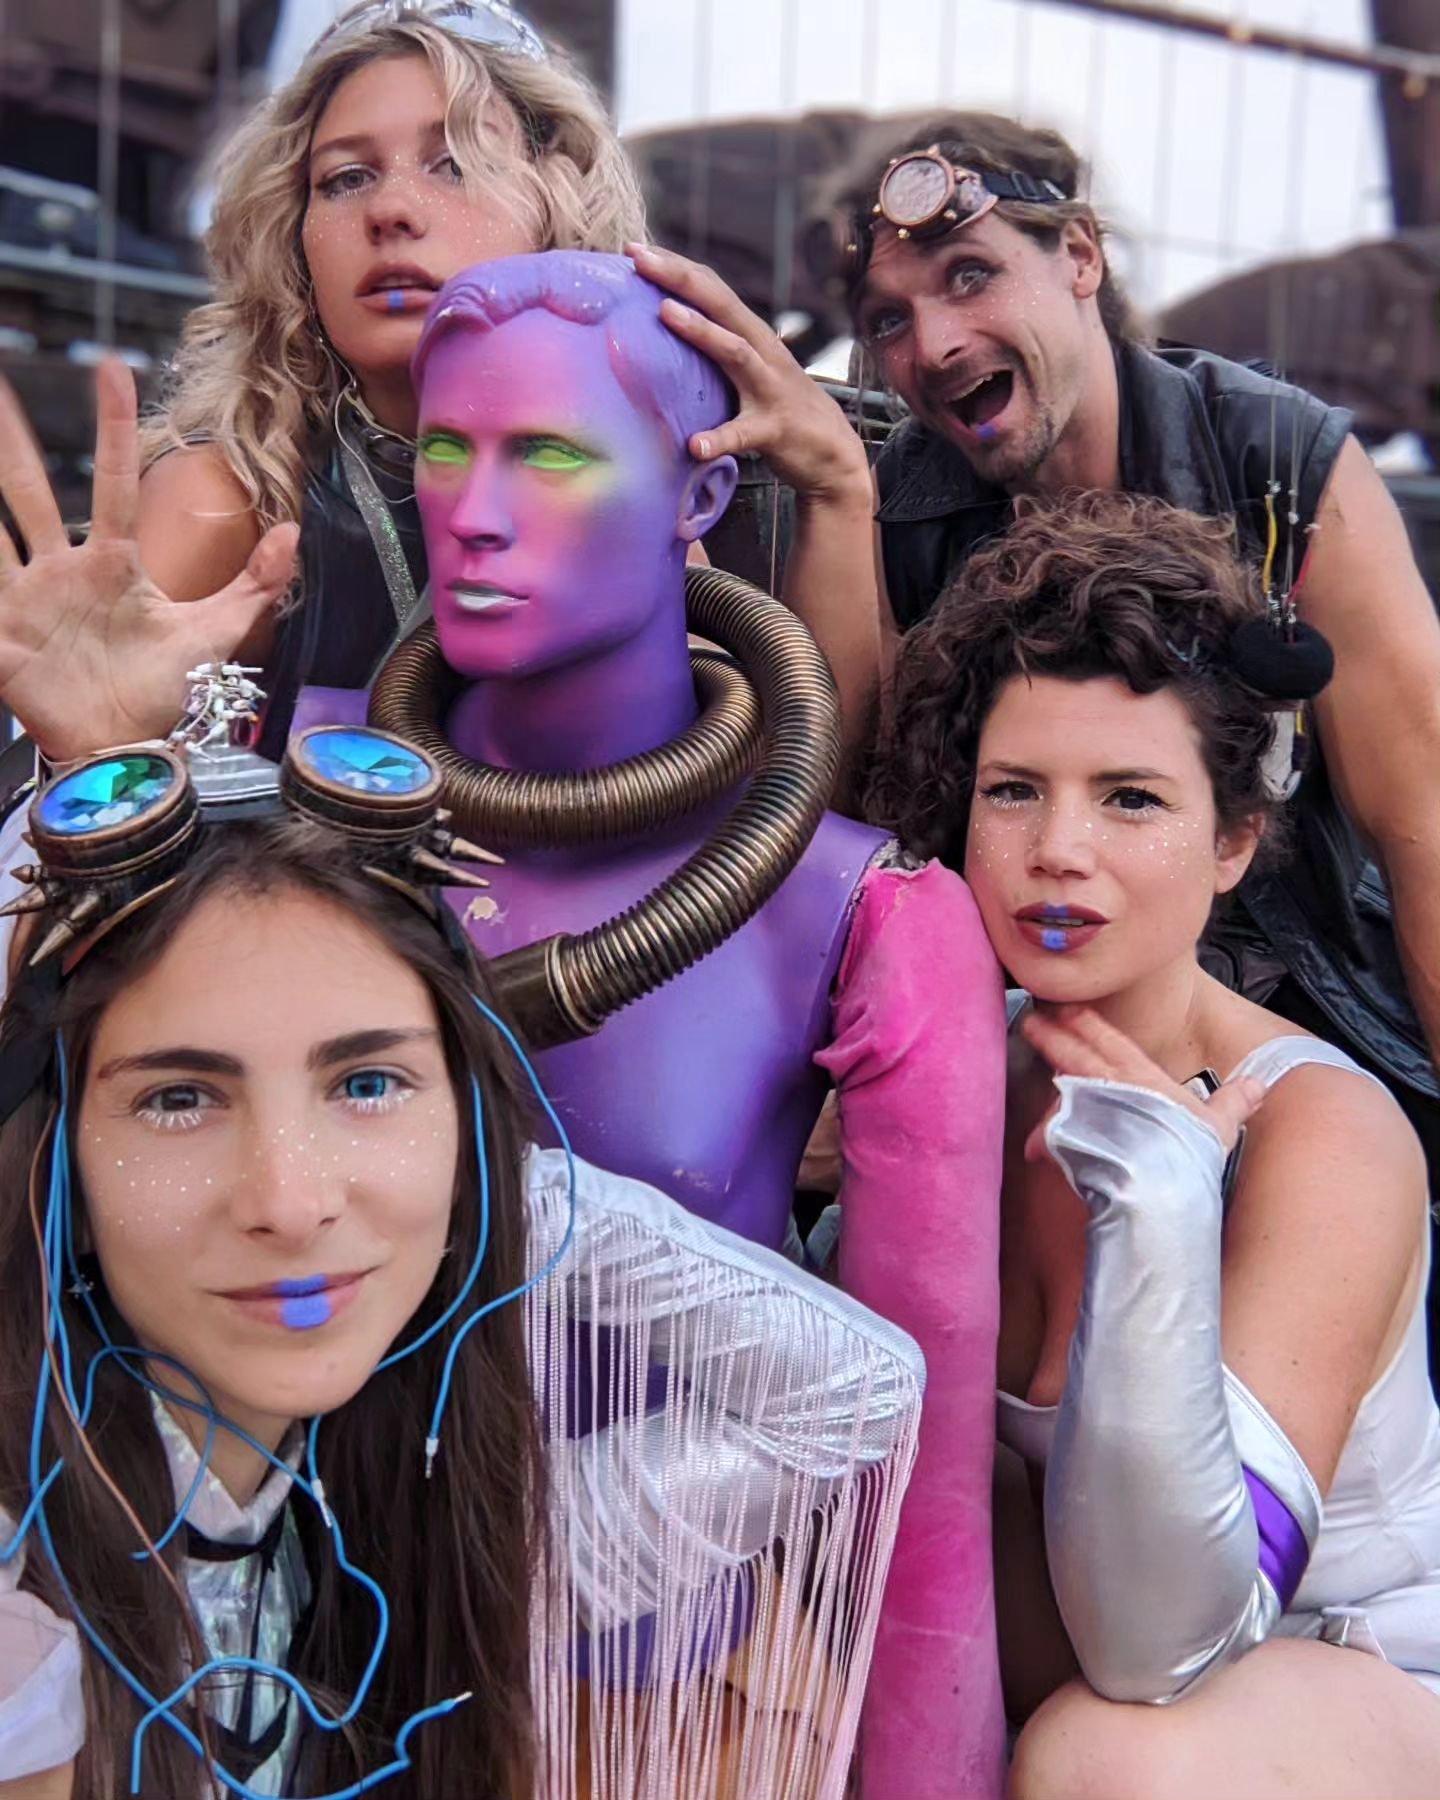 The Dreamlings from Nexus just speed-landed at Melt festival, on their mission to transmit the wildest dreams of humanity to the majestic machines, who just entered their REM phase!

Come meet them tonight by the mother of all machines and participat